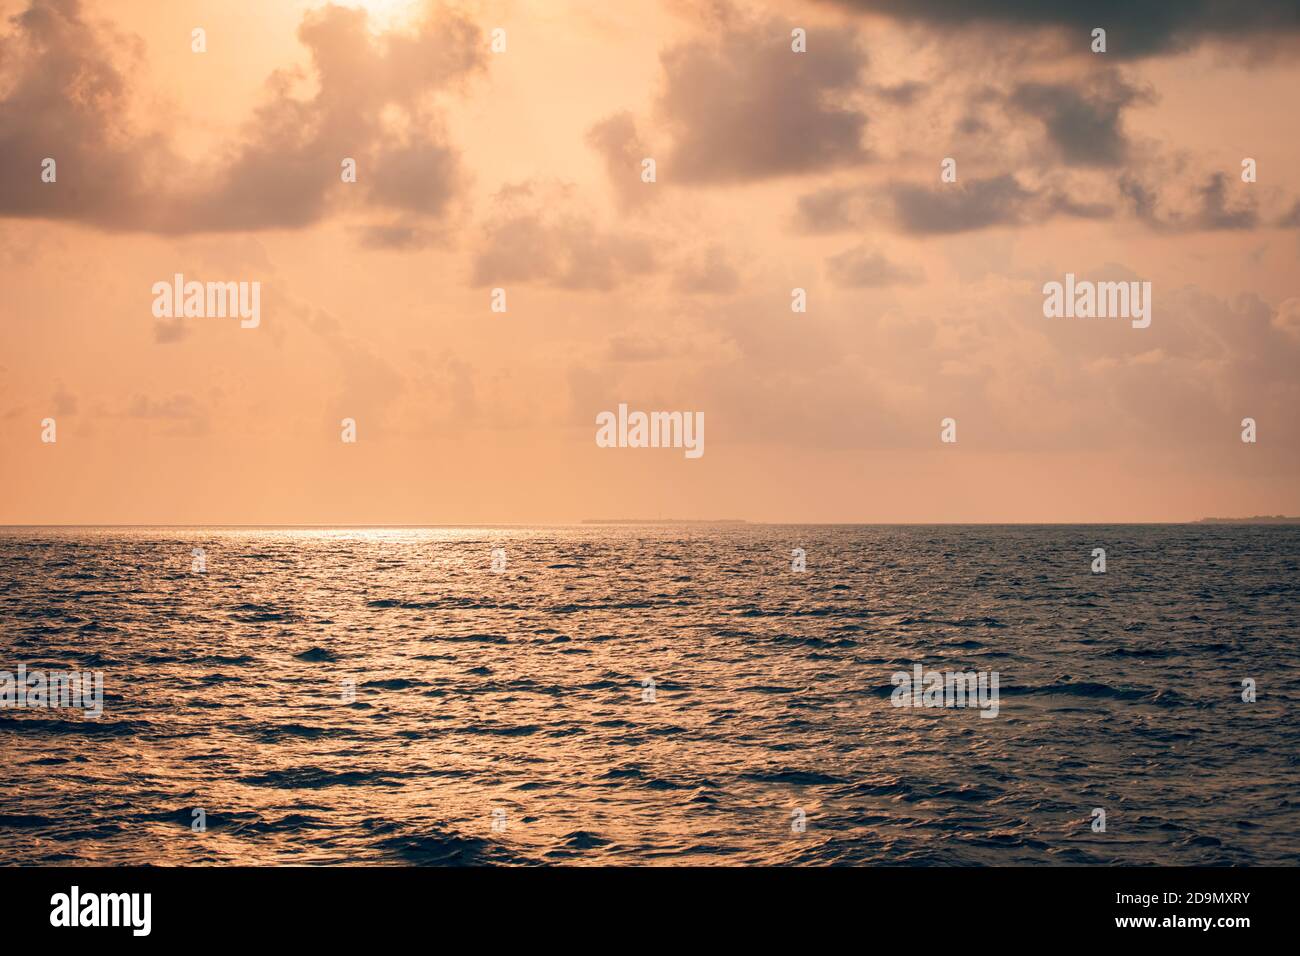 Calm sea with sunset sky and sun through the clouds over. Meditation positive vibes ocean sky background. Tranquil seascape. Horizon over the water. Stock Photo